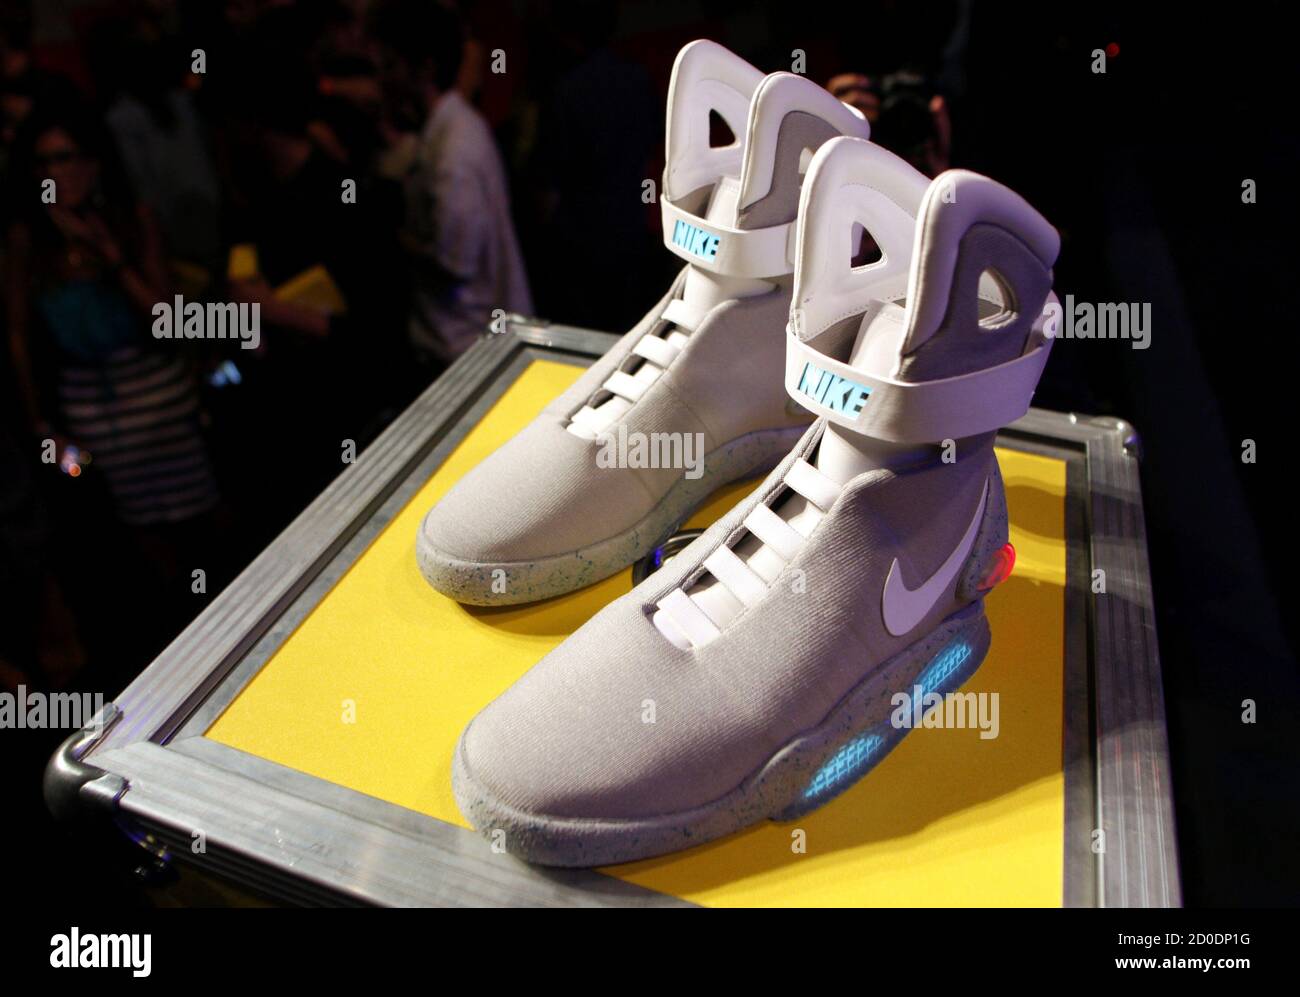 letal de nuevo Lo encontré A pair of 2011 NIKE MAG shoes, based on the original NIKE MAG worn in 2015  by the "Back to the Future" character Marty McFly, played by Michael J.  Fox, is displayed